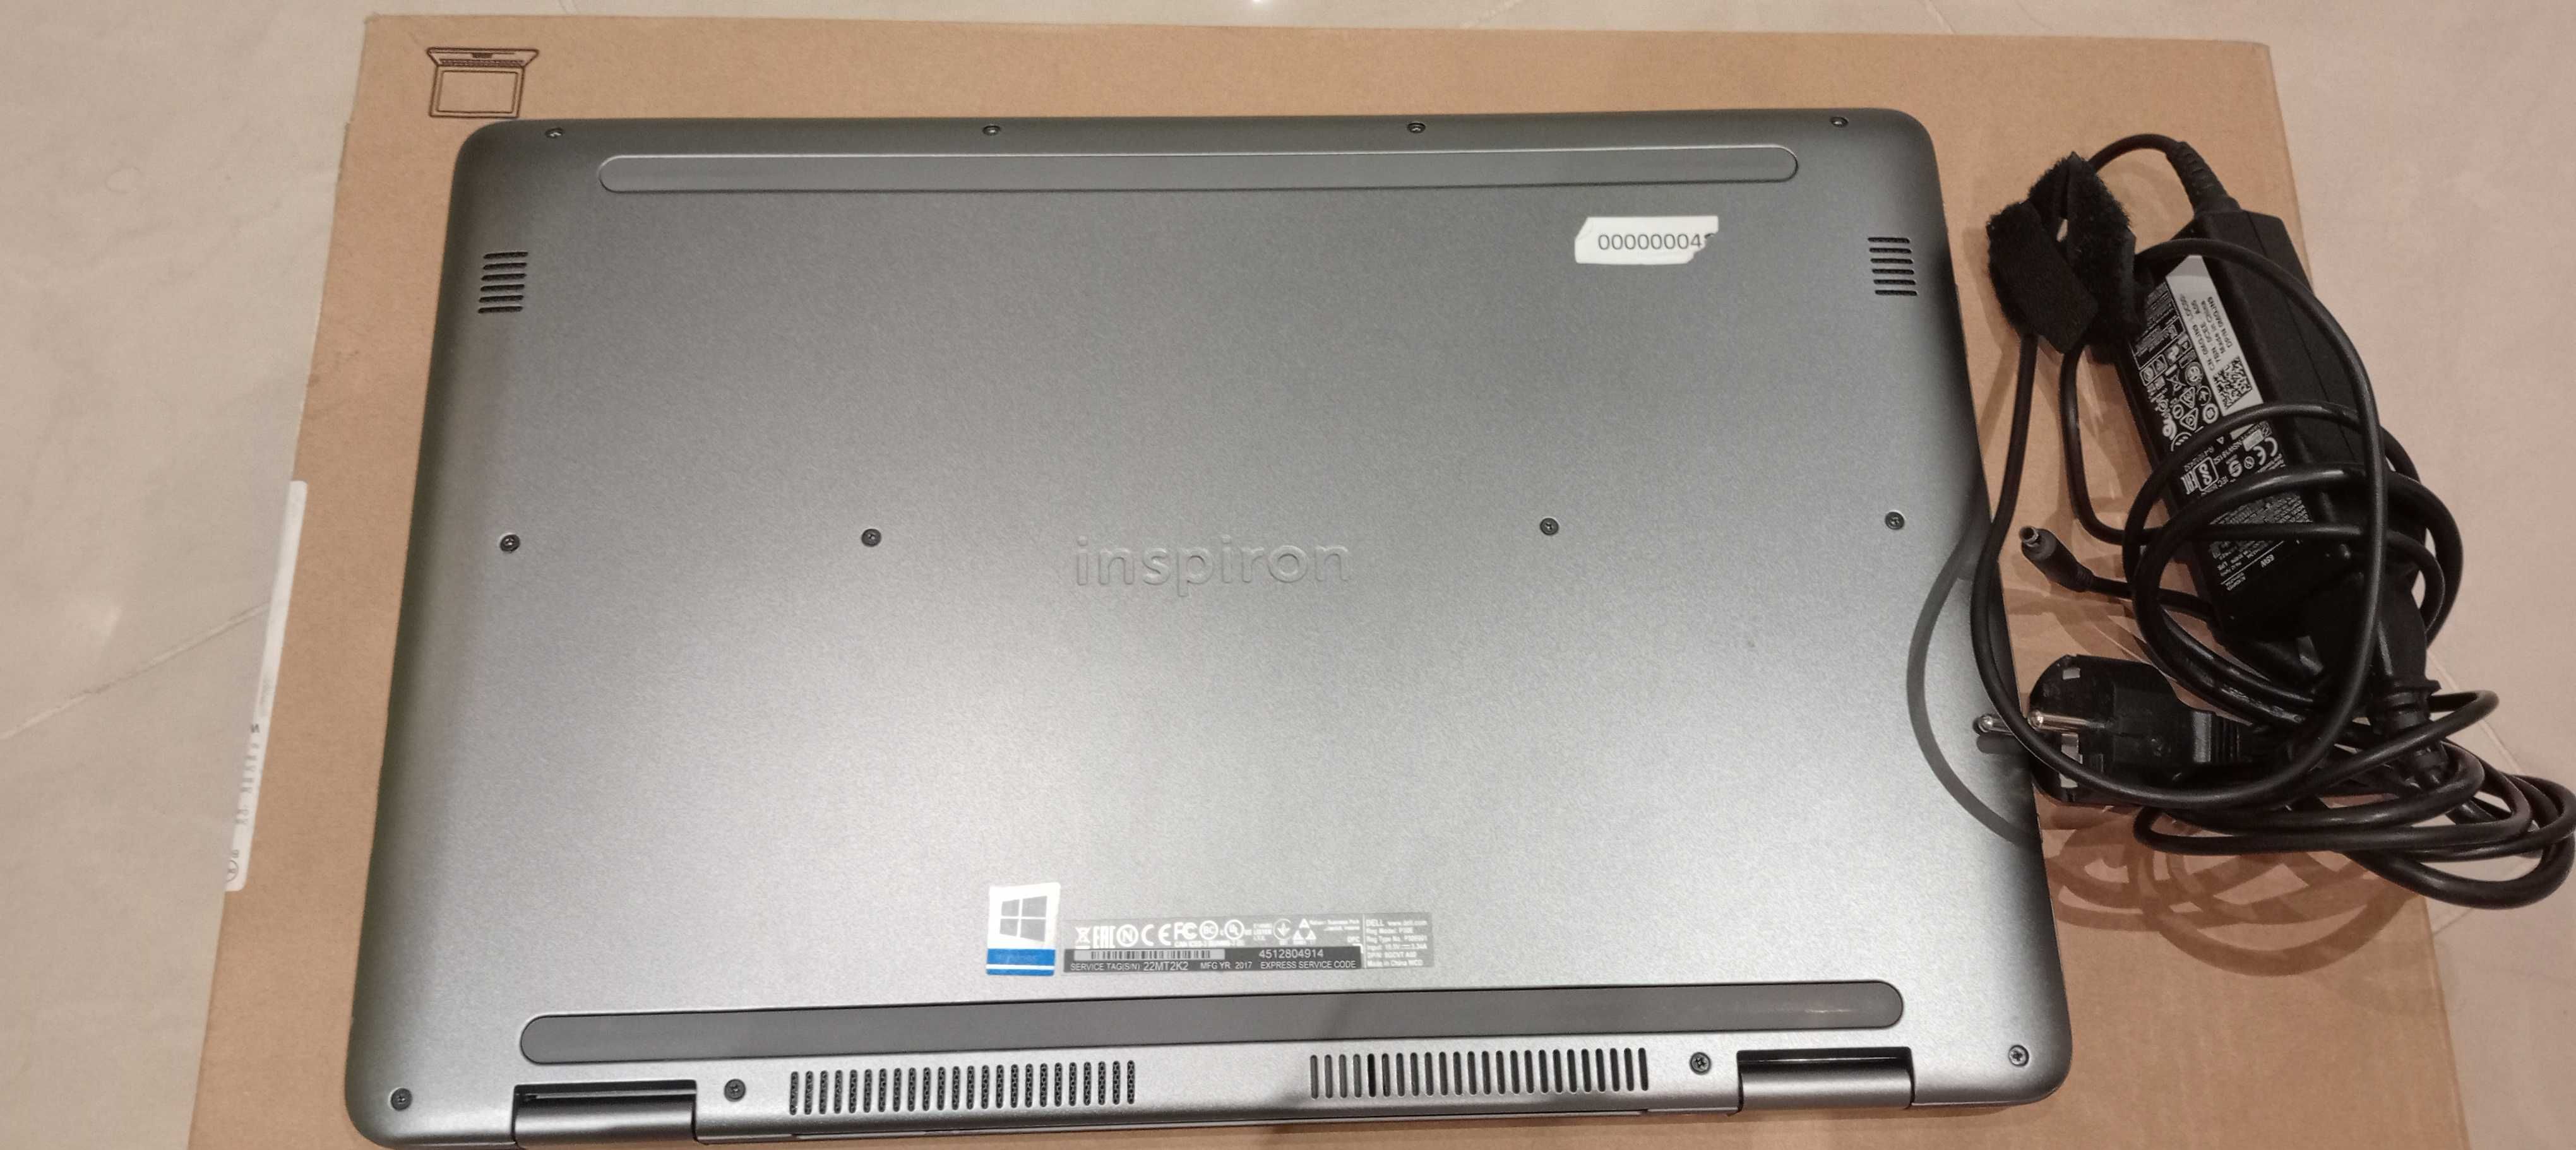 DELL Inspiron 7773, 17.3, Gaming/Business, Touch Display, aproape nou